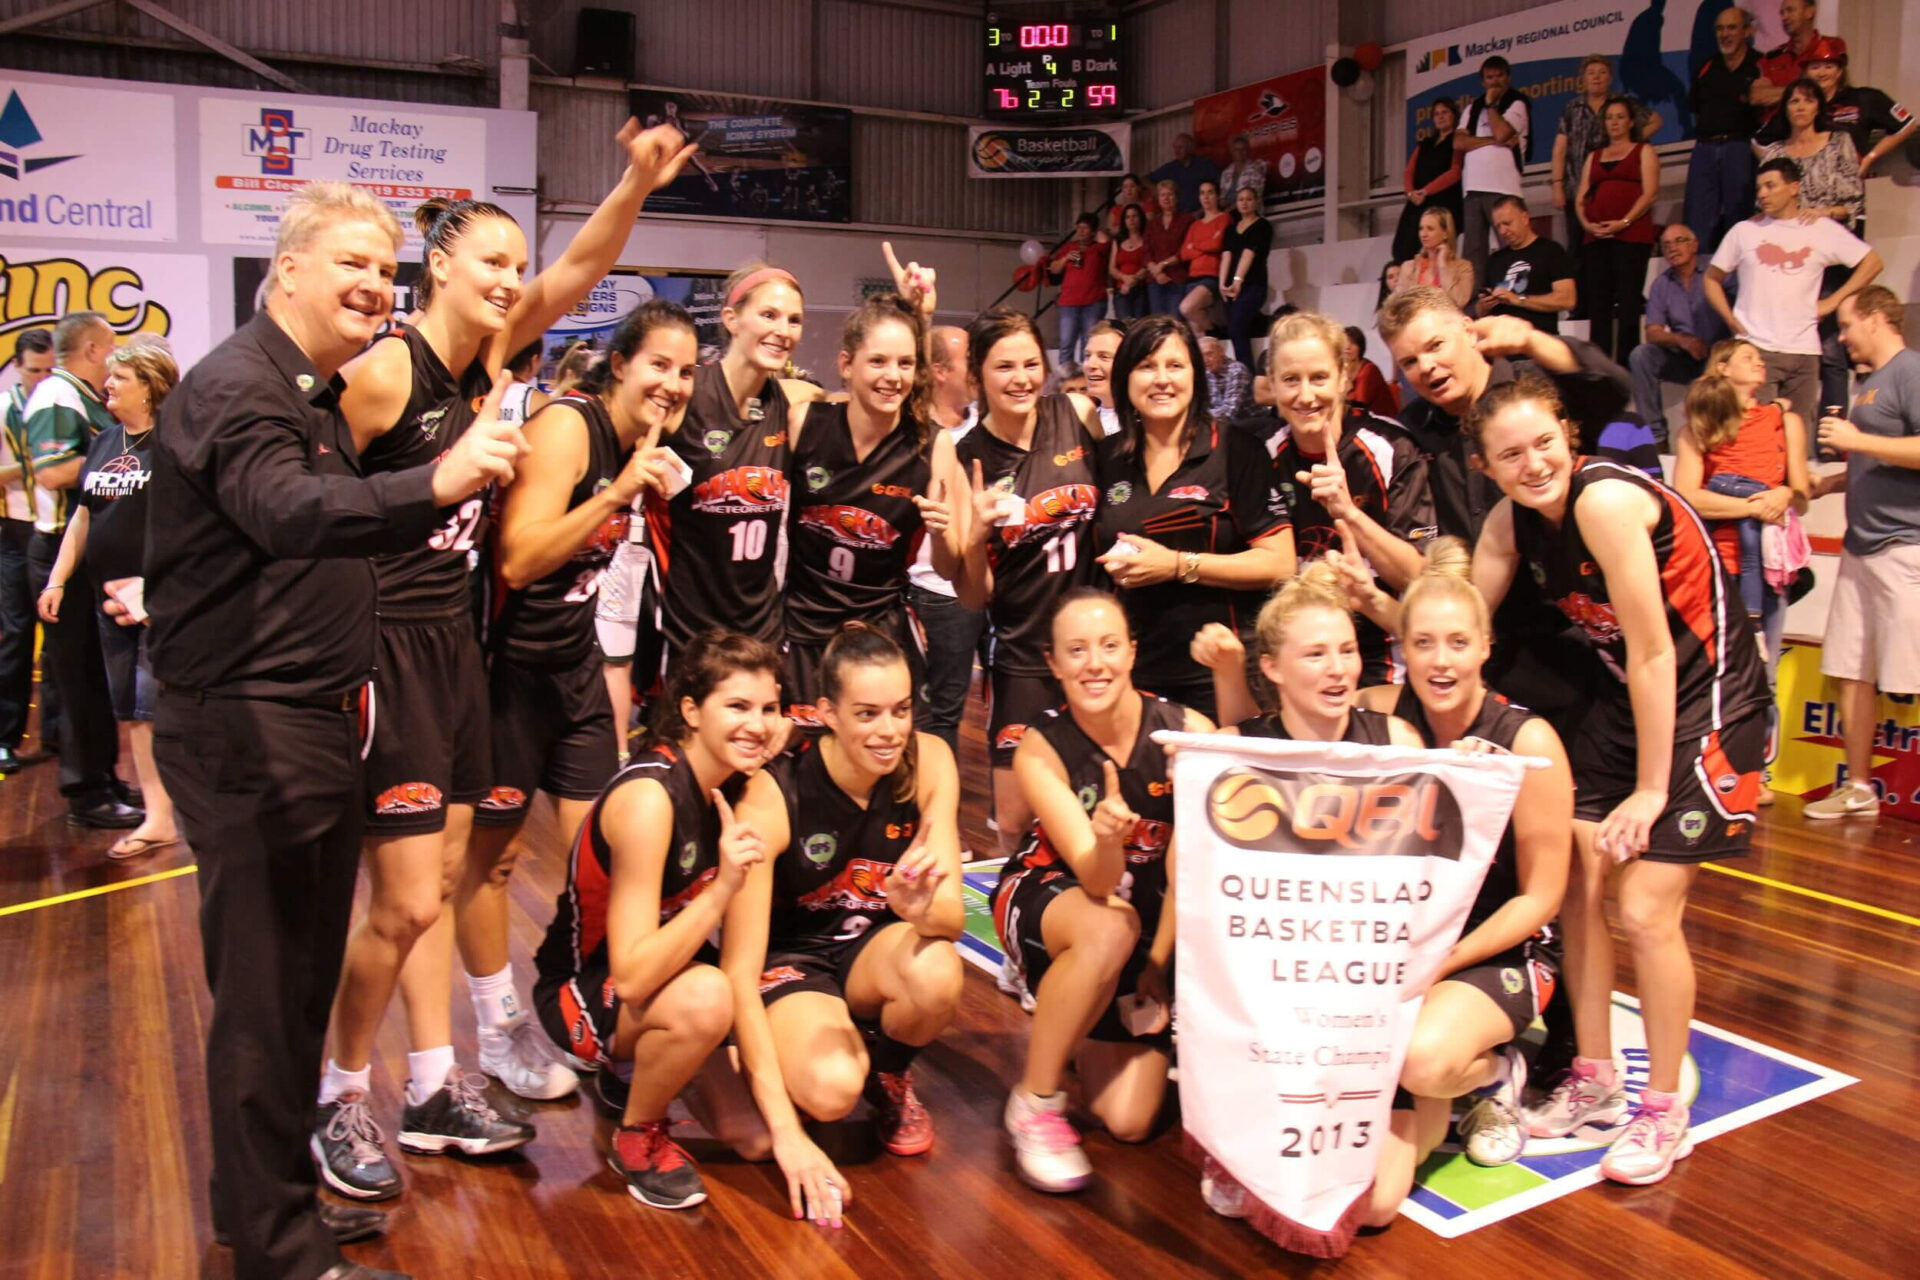 Championship Teams - 2013 Global Product Search Mackay Meteorettes Overall Record - 17 wins & 1 loss at Mackay Basketball